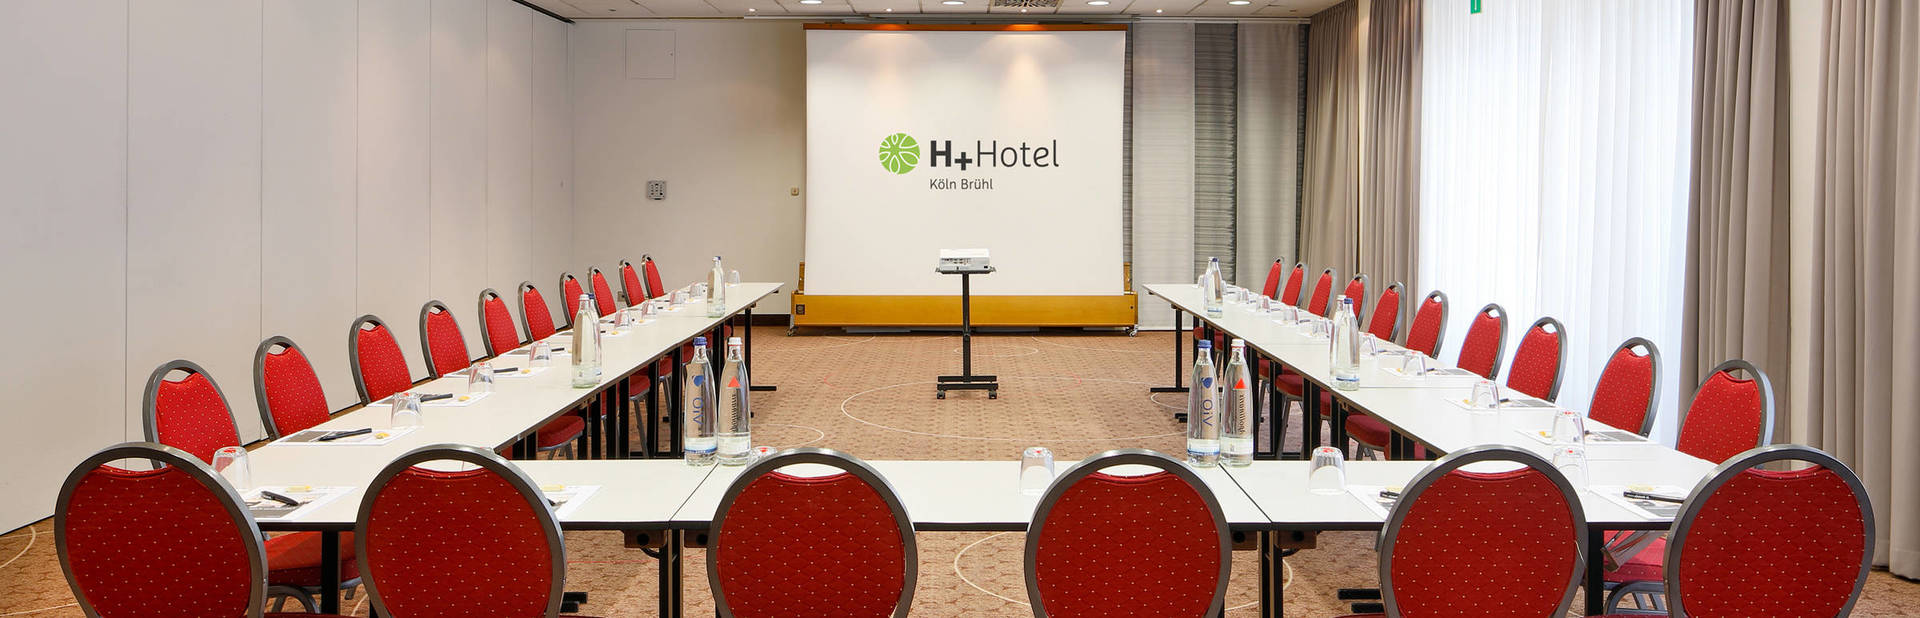 Professional and service-oriented at the H+ Hotel Köln Brühl - Official website